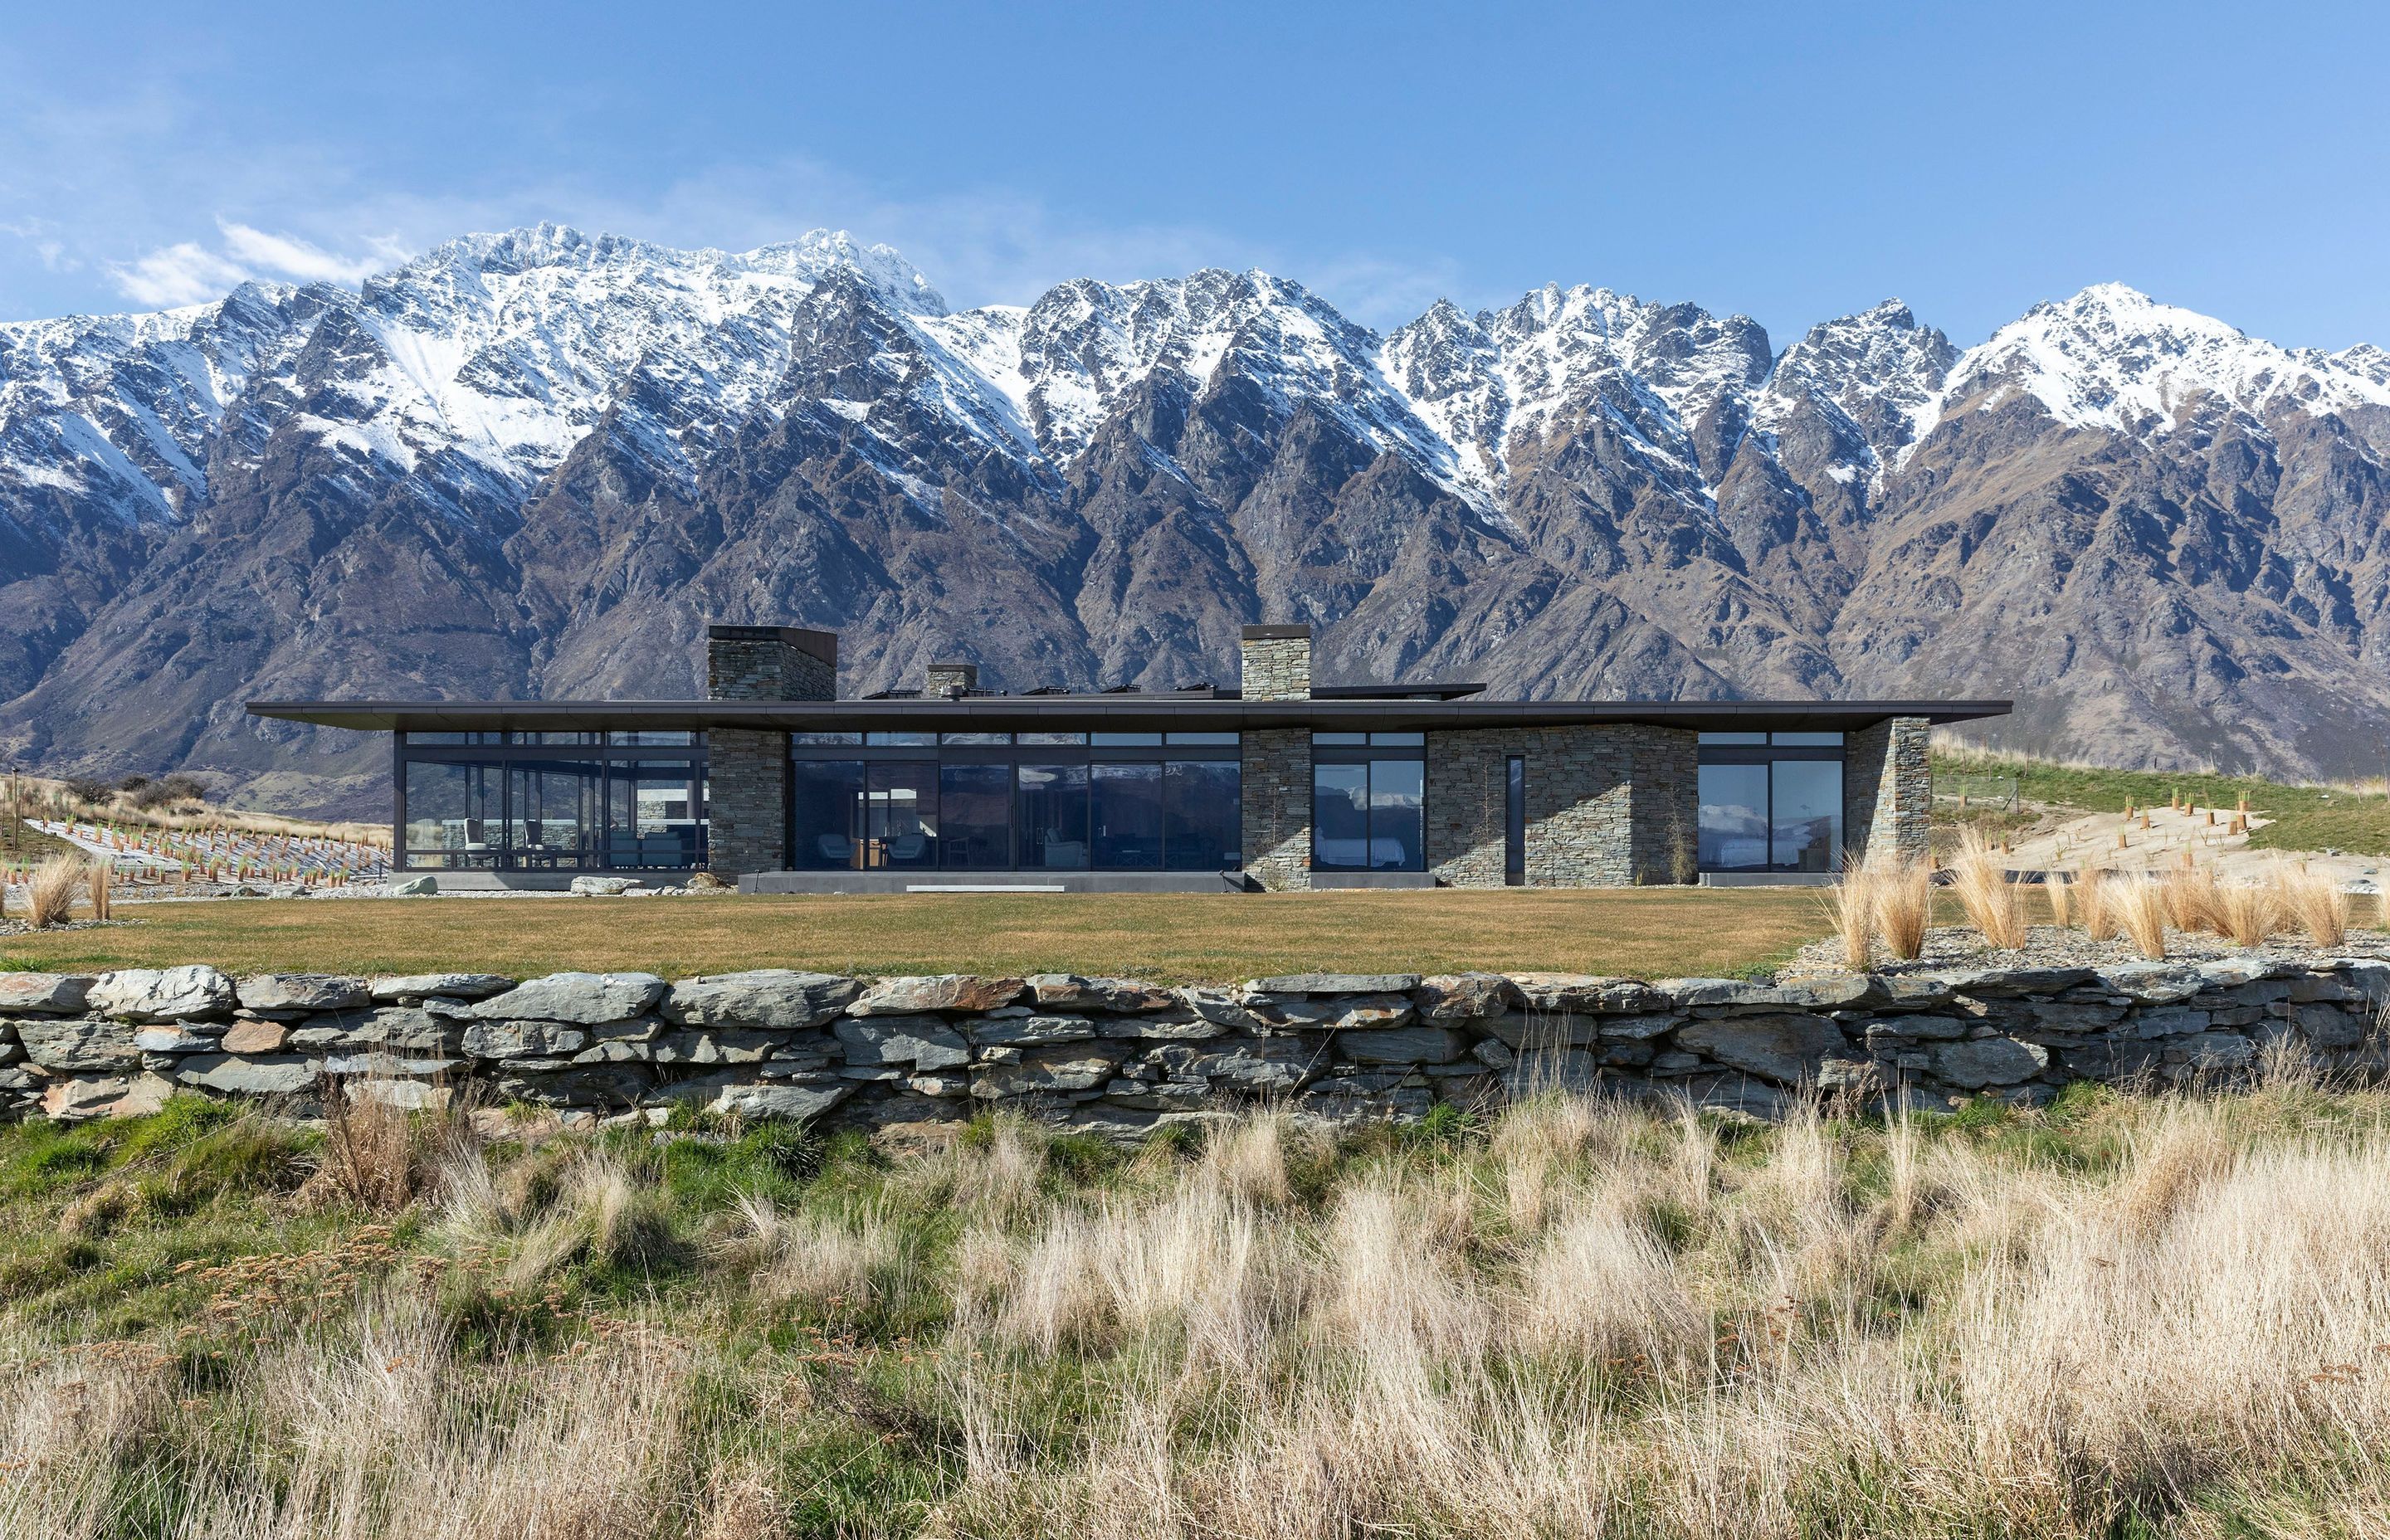 With a slim profile, the warm roof appears lightweight, yet it is actually covered in gravel, making the house very discreet when seen from the air or from the local skifields. SD.